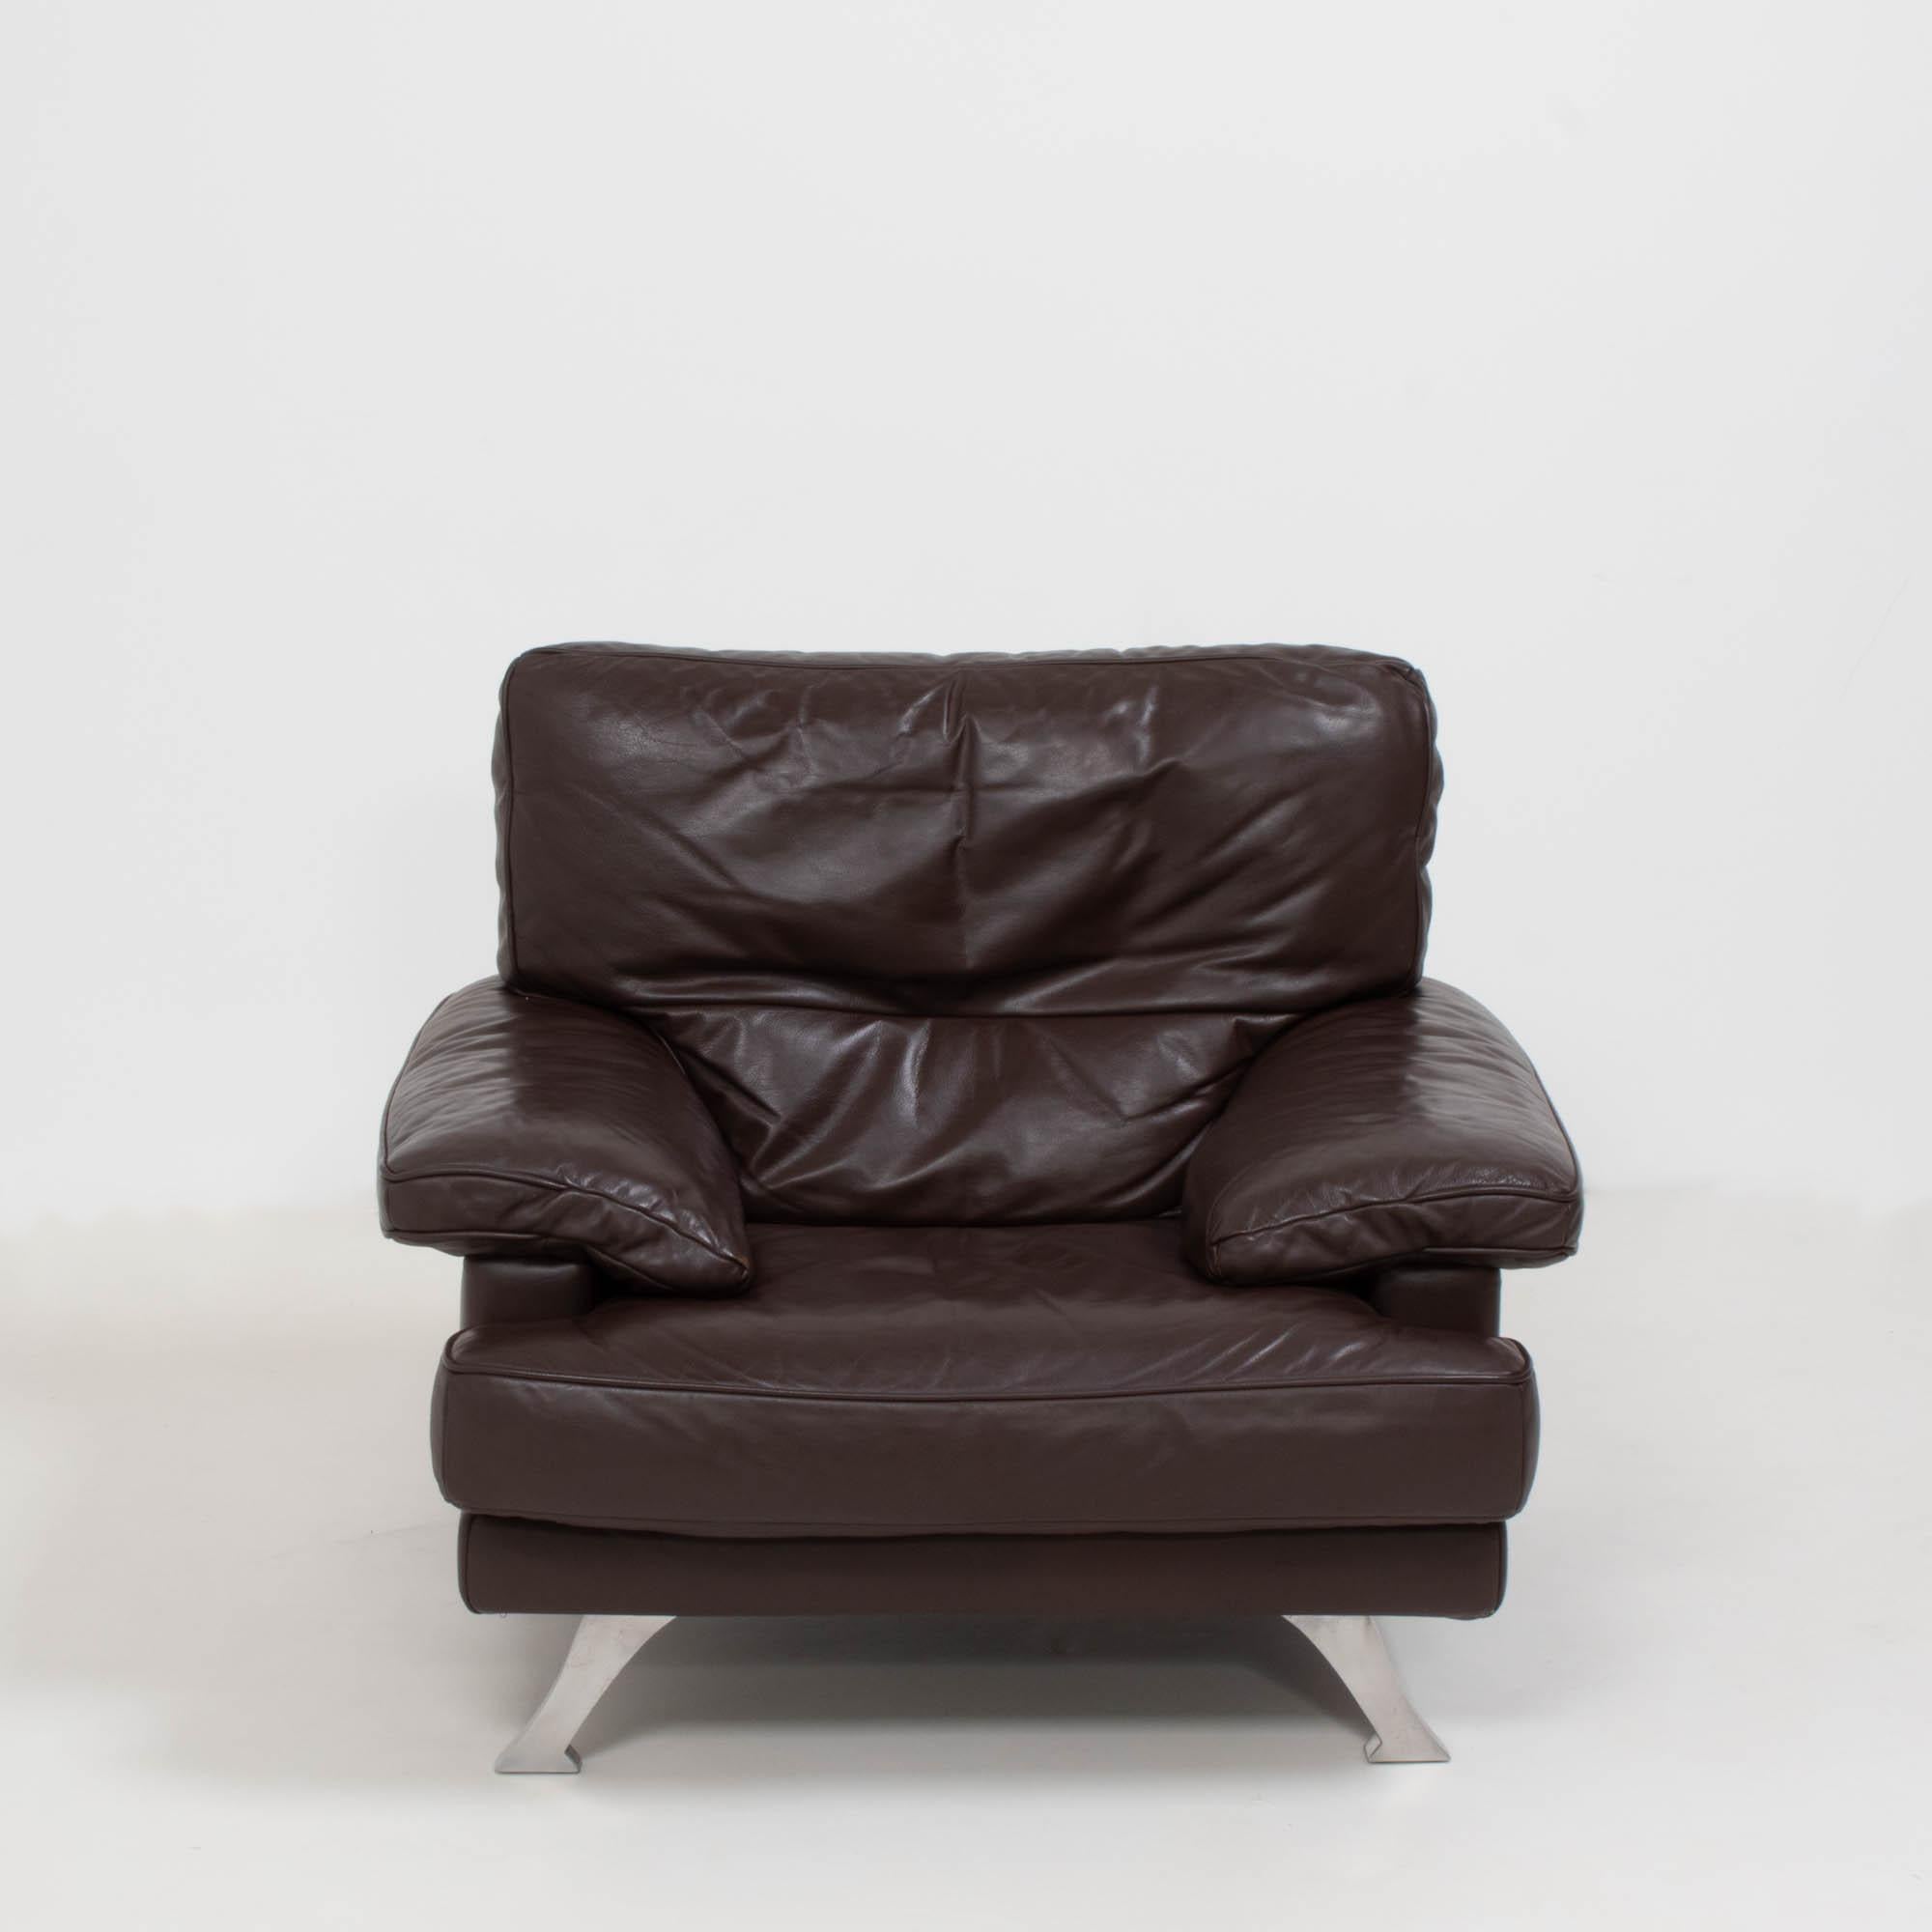 Manufactured by Ligne Roset, this Melodie armchair gives the traditional design a modern twist.

Upholstered in buttery dark brown leather, the seat offers ultimate comfort with deep back and seat cushions and additional padding over the